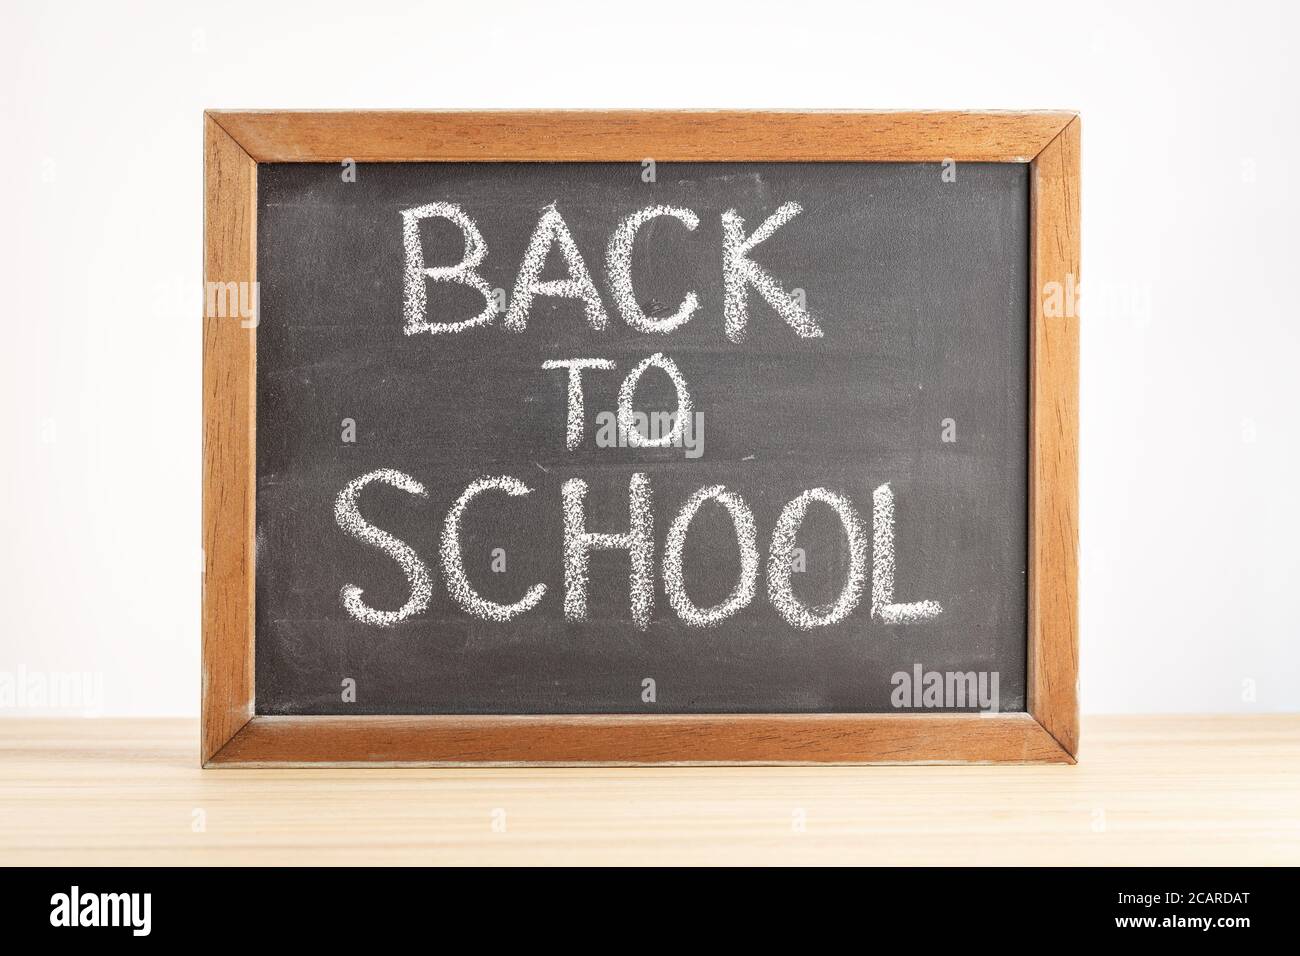 Back to school concept. Chalkboard with handwritten text on table Stock Photo